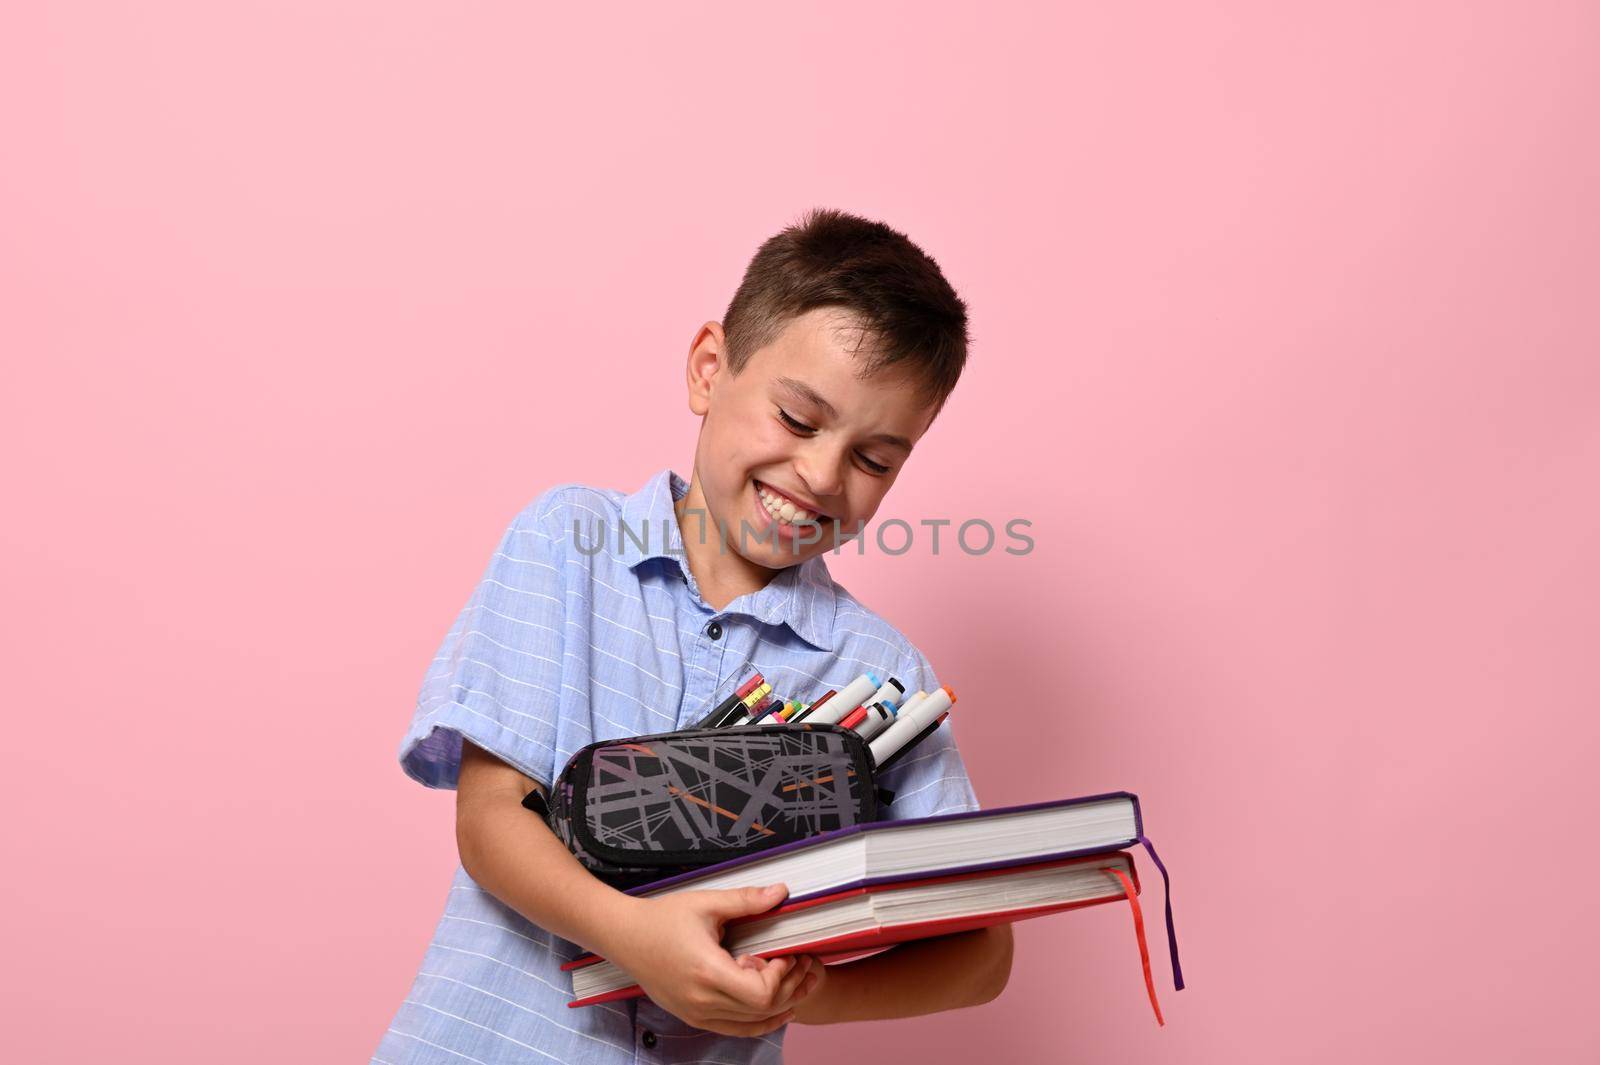 Adorable school boy with pencil case and books laughing , posing over pink background with copy space. Concepts of back to school with facial expressions and emotions